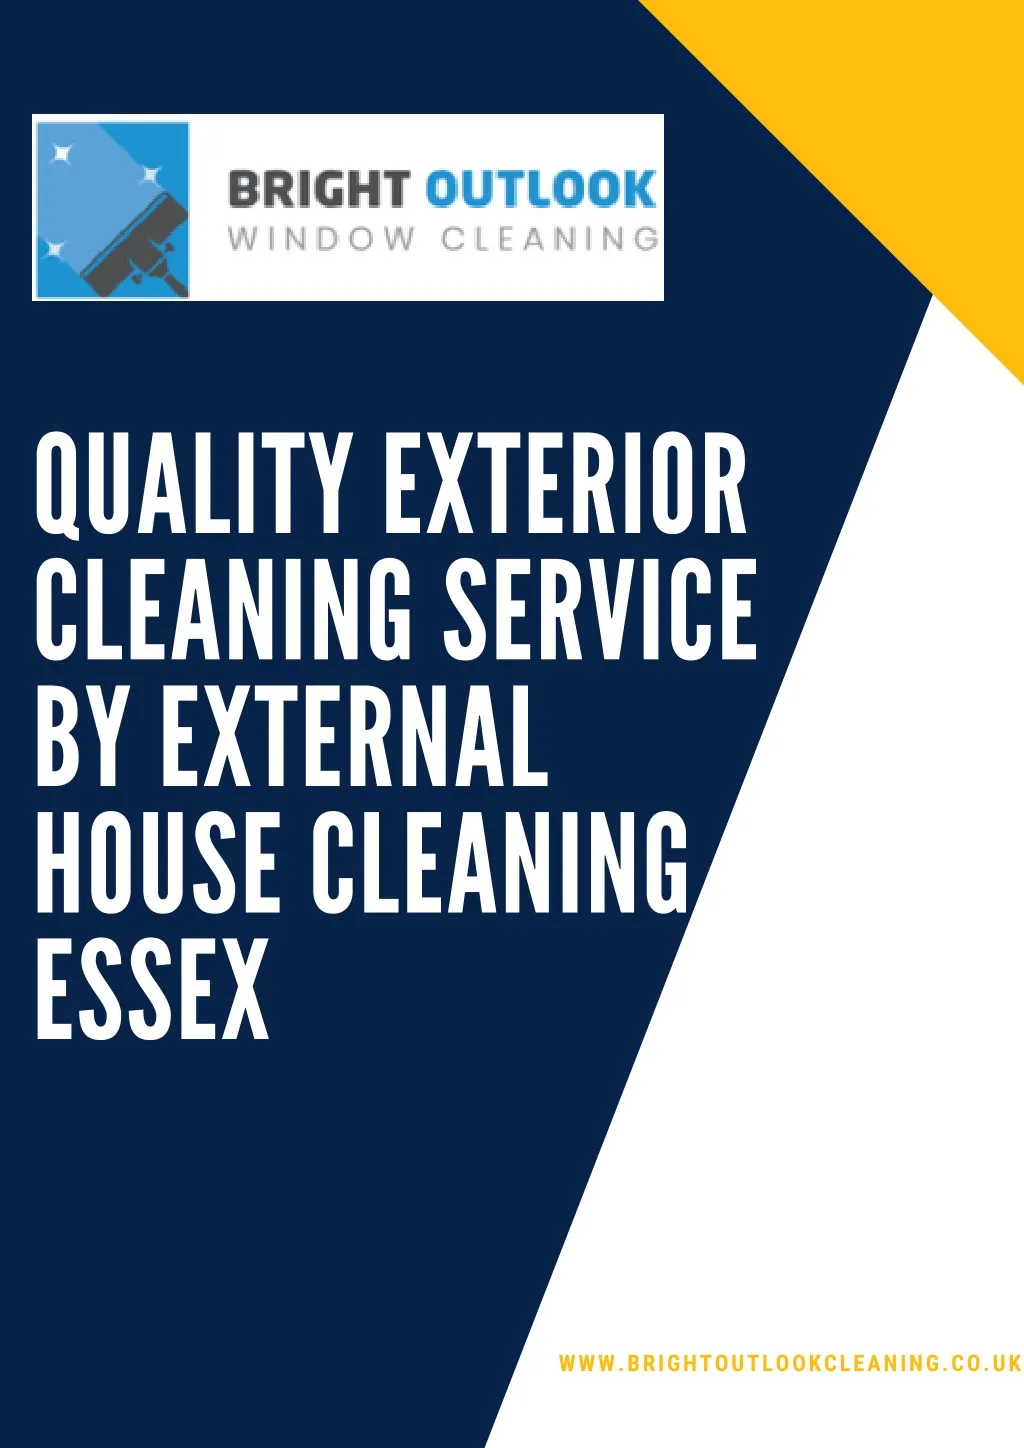 qu a lity exterior cle a ning service by extern